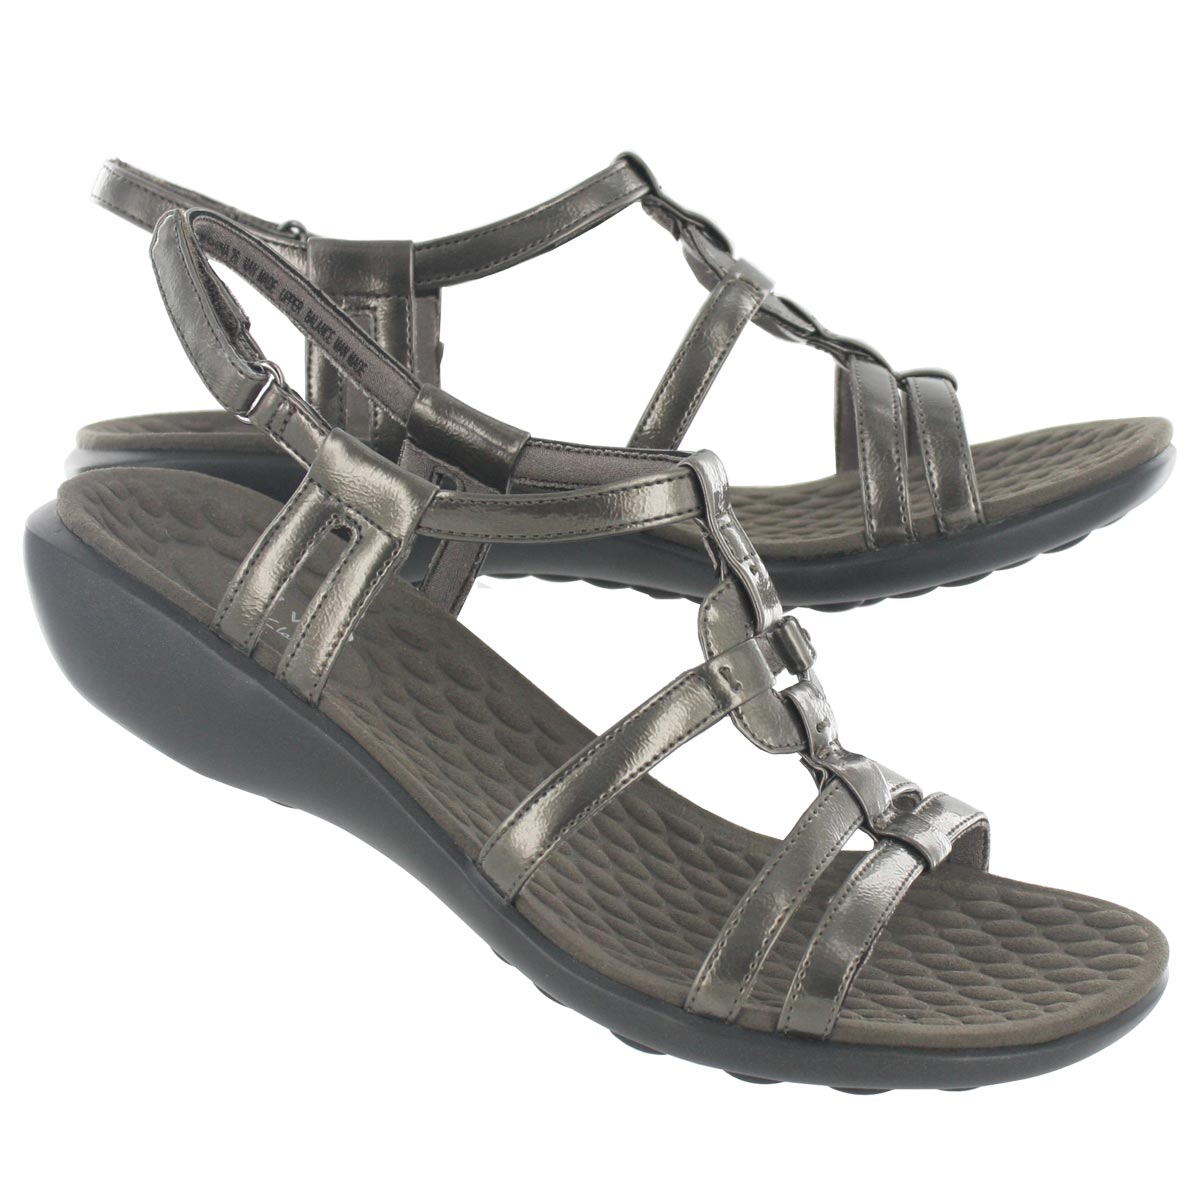 clarks privo zyon sandals with adjustable strap